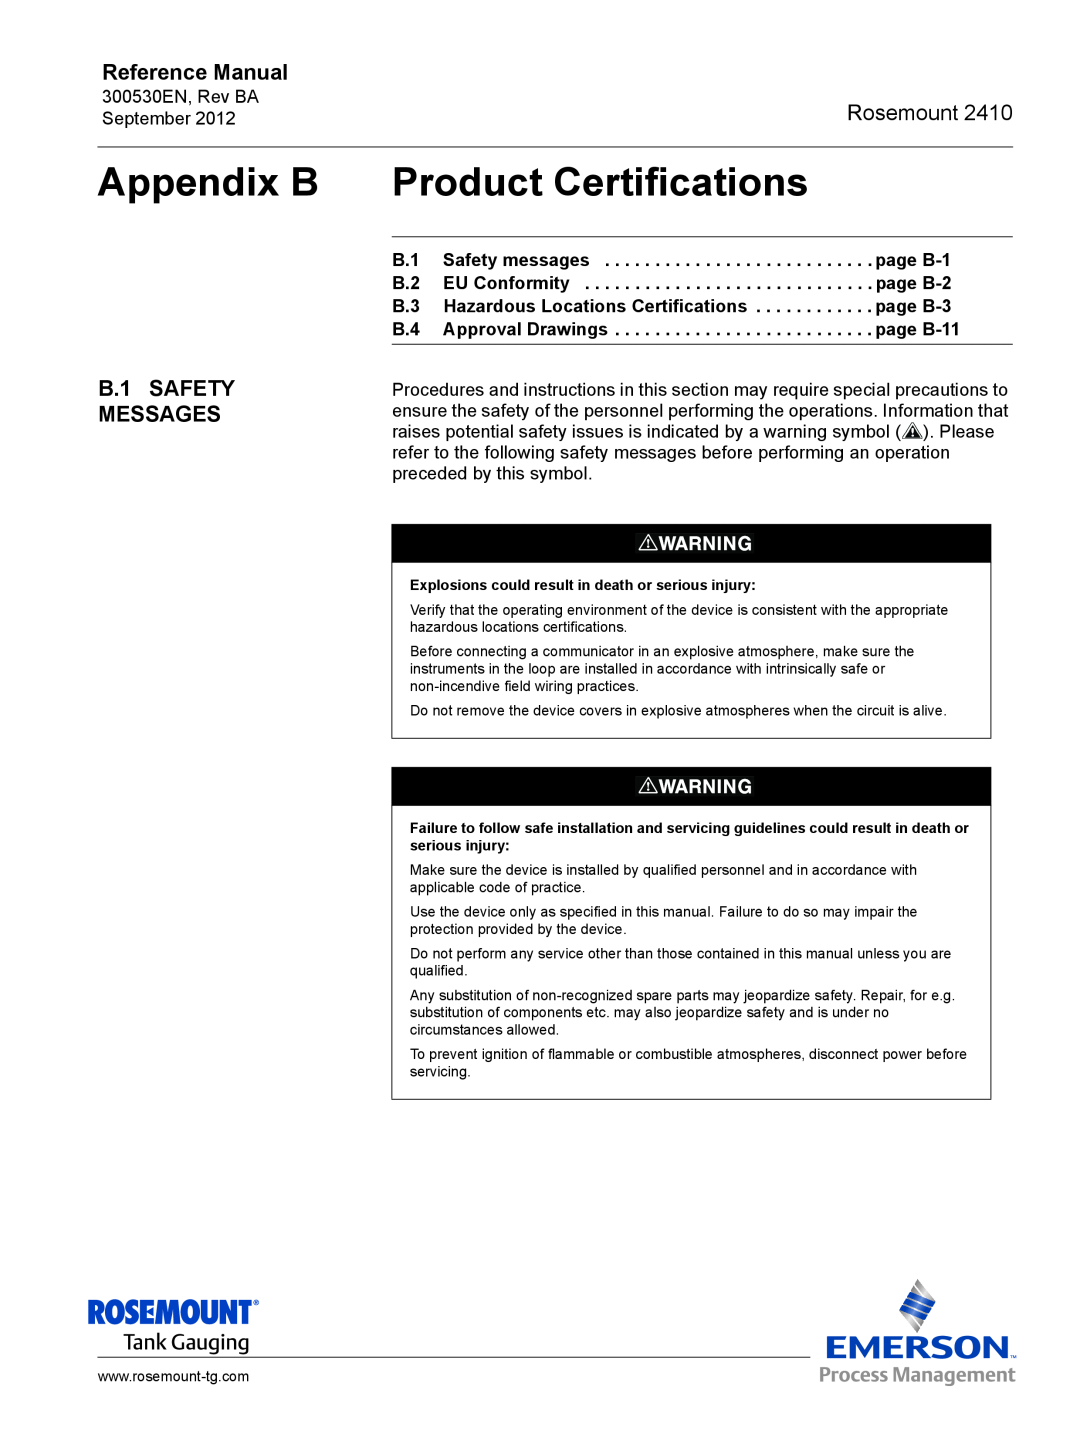 Emerson Process Management Rosemount 2410 manual Appendix B Product Certifications, B.1 SAFETY MESSAGES, Reference Manual 